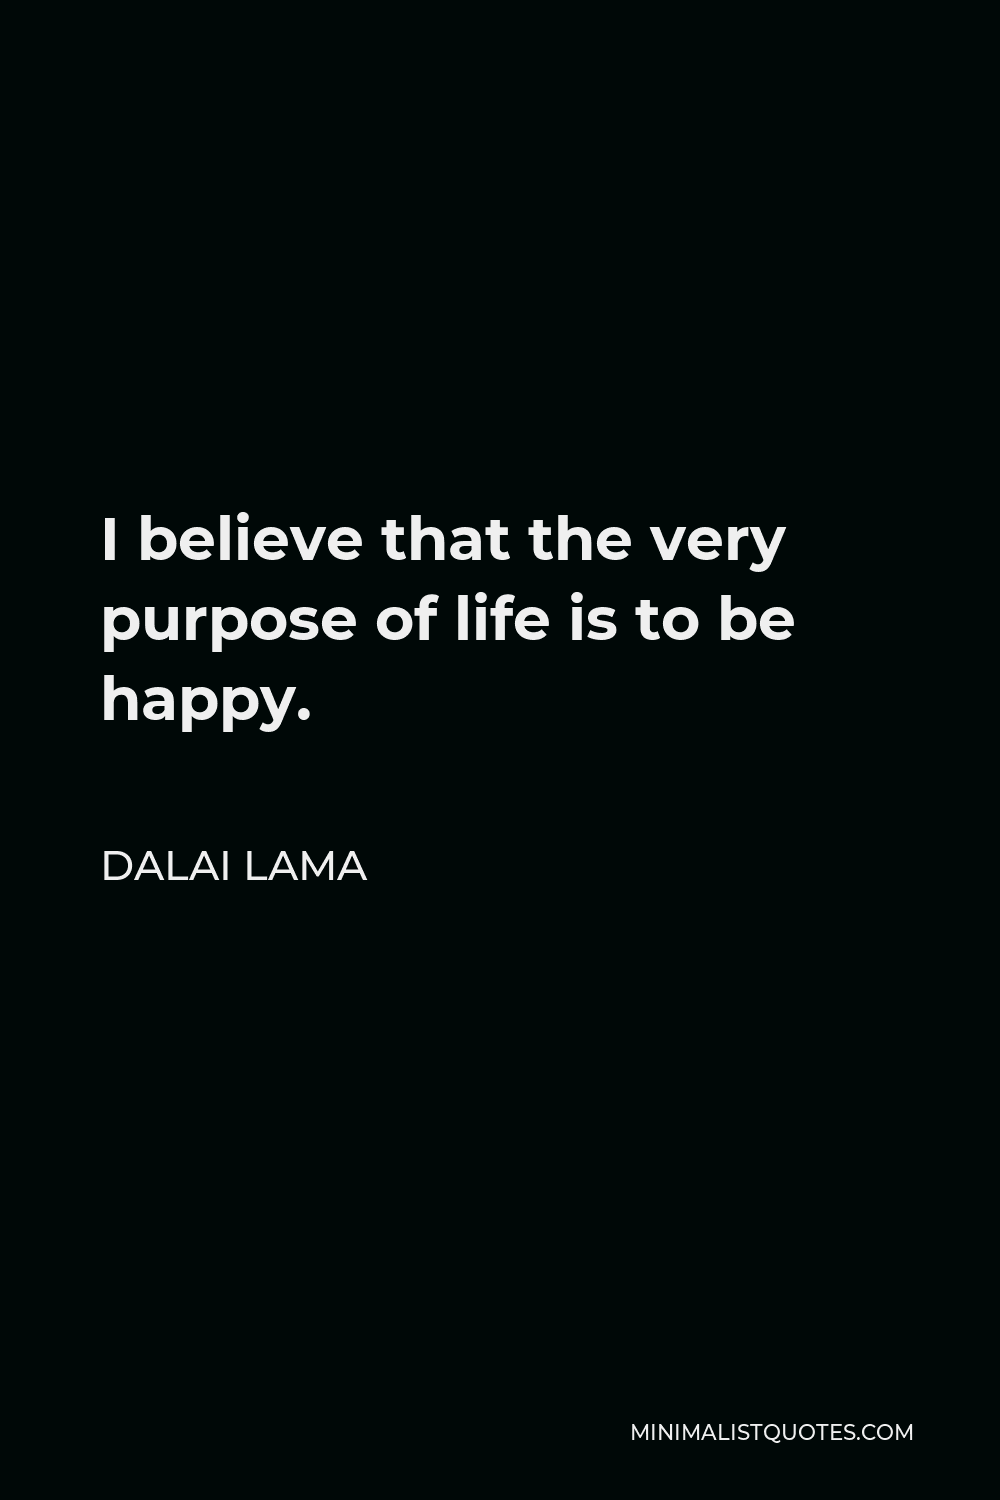 Dalai Lama Quote - I believe that the very purpose of life is to be happy.